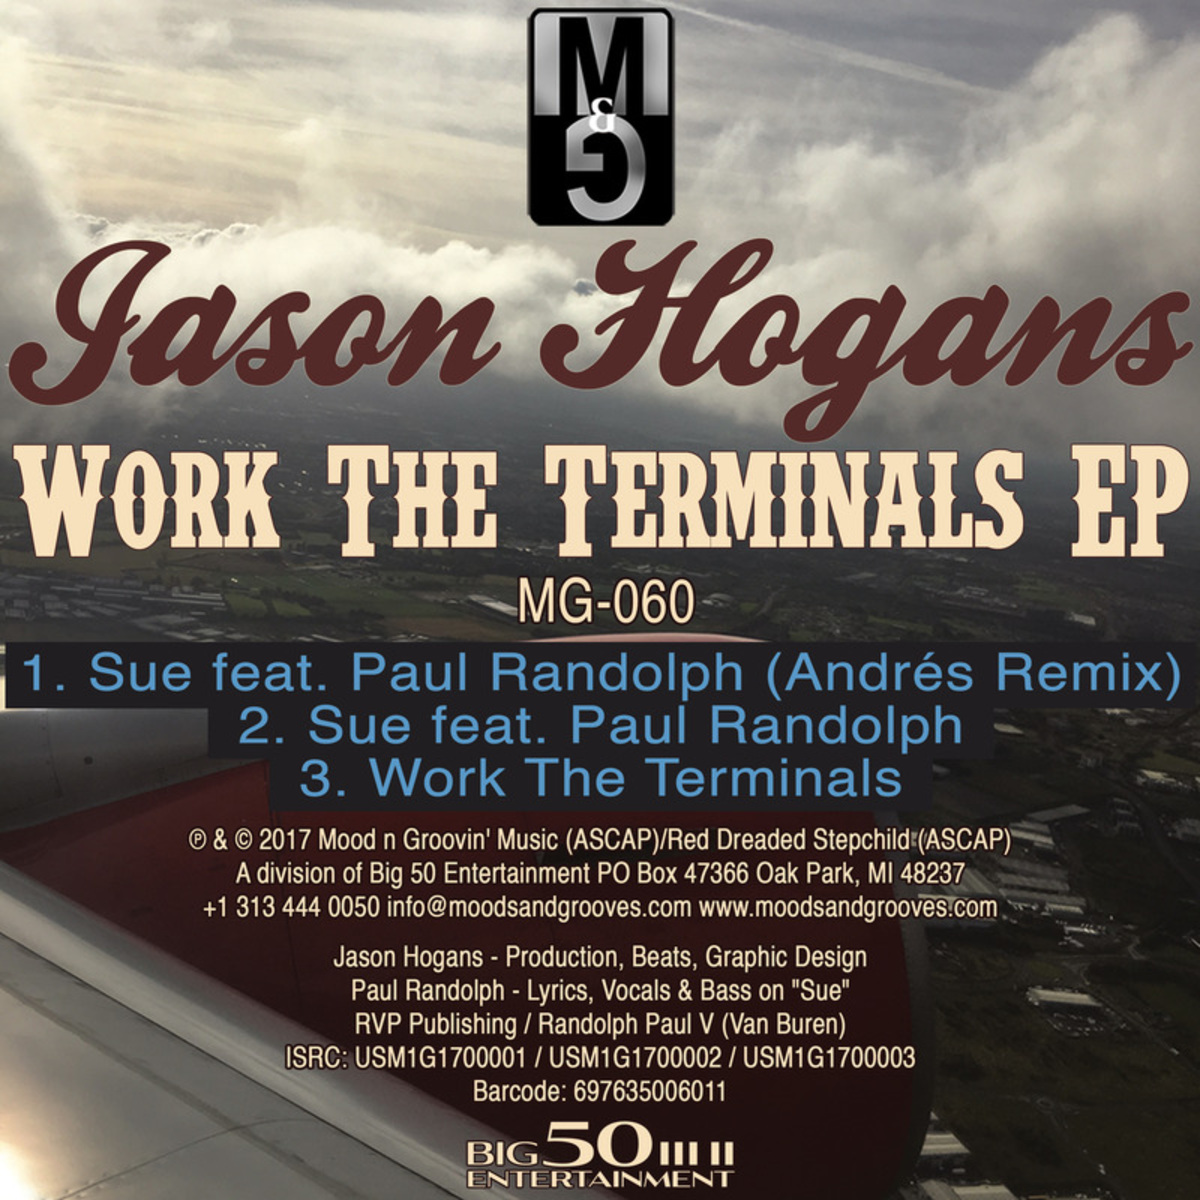 Jason Hogans - Work the Terminals EP / Moods & Grooves Records